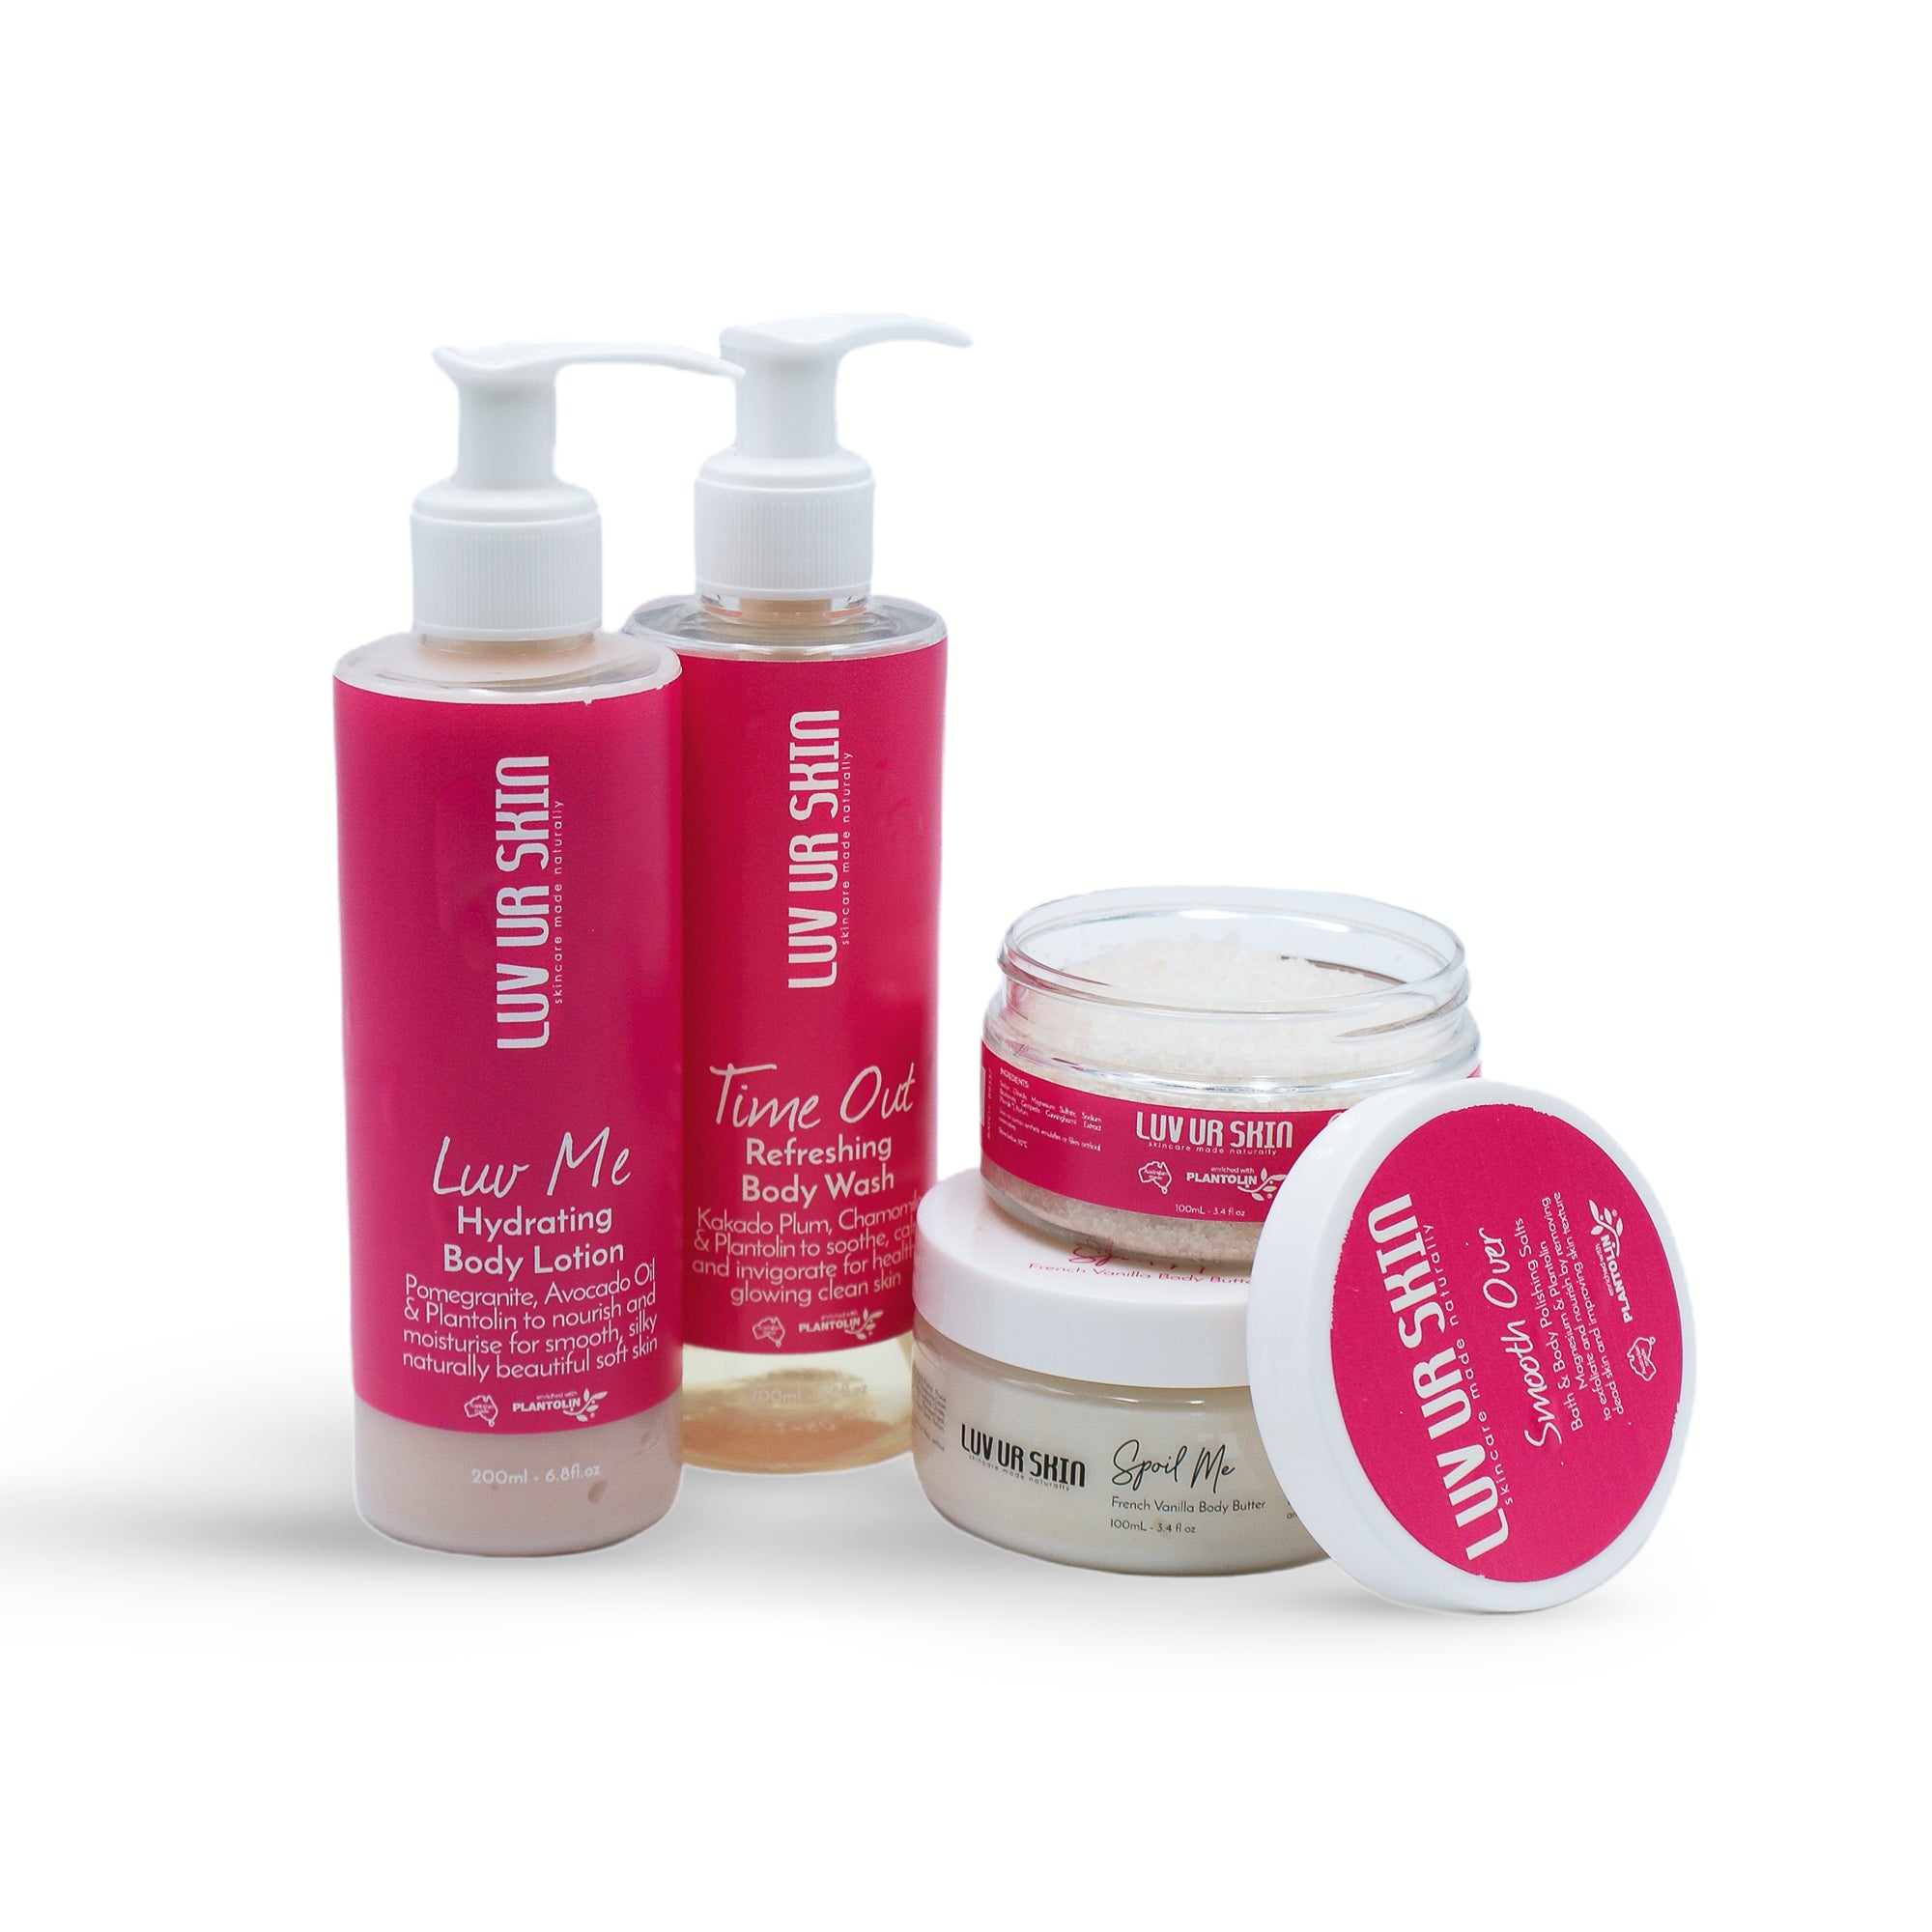 COMPLETE BODY PAMPER PACK